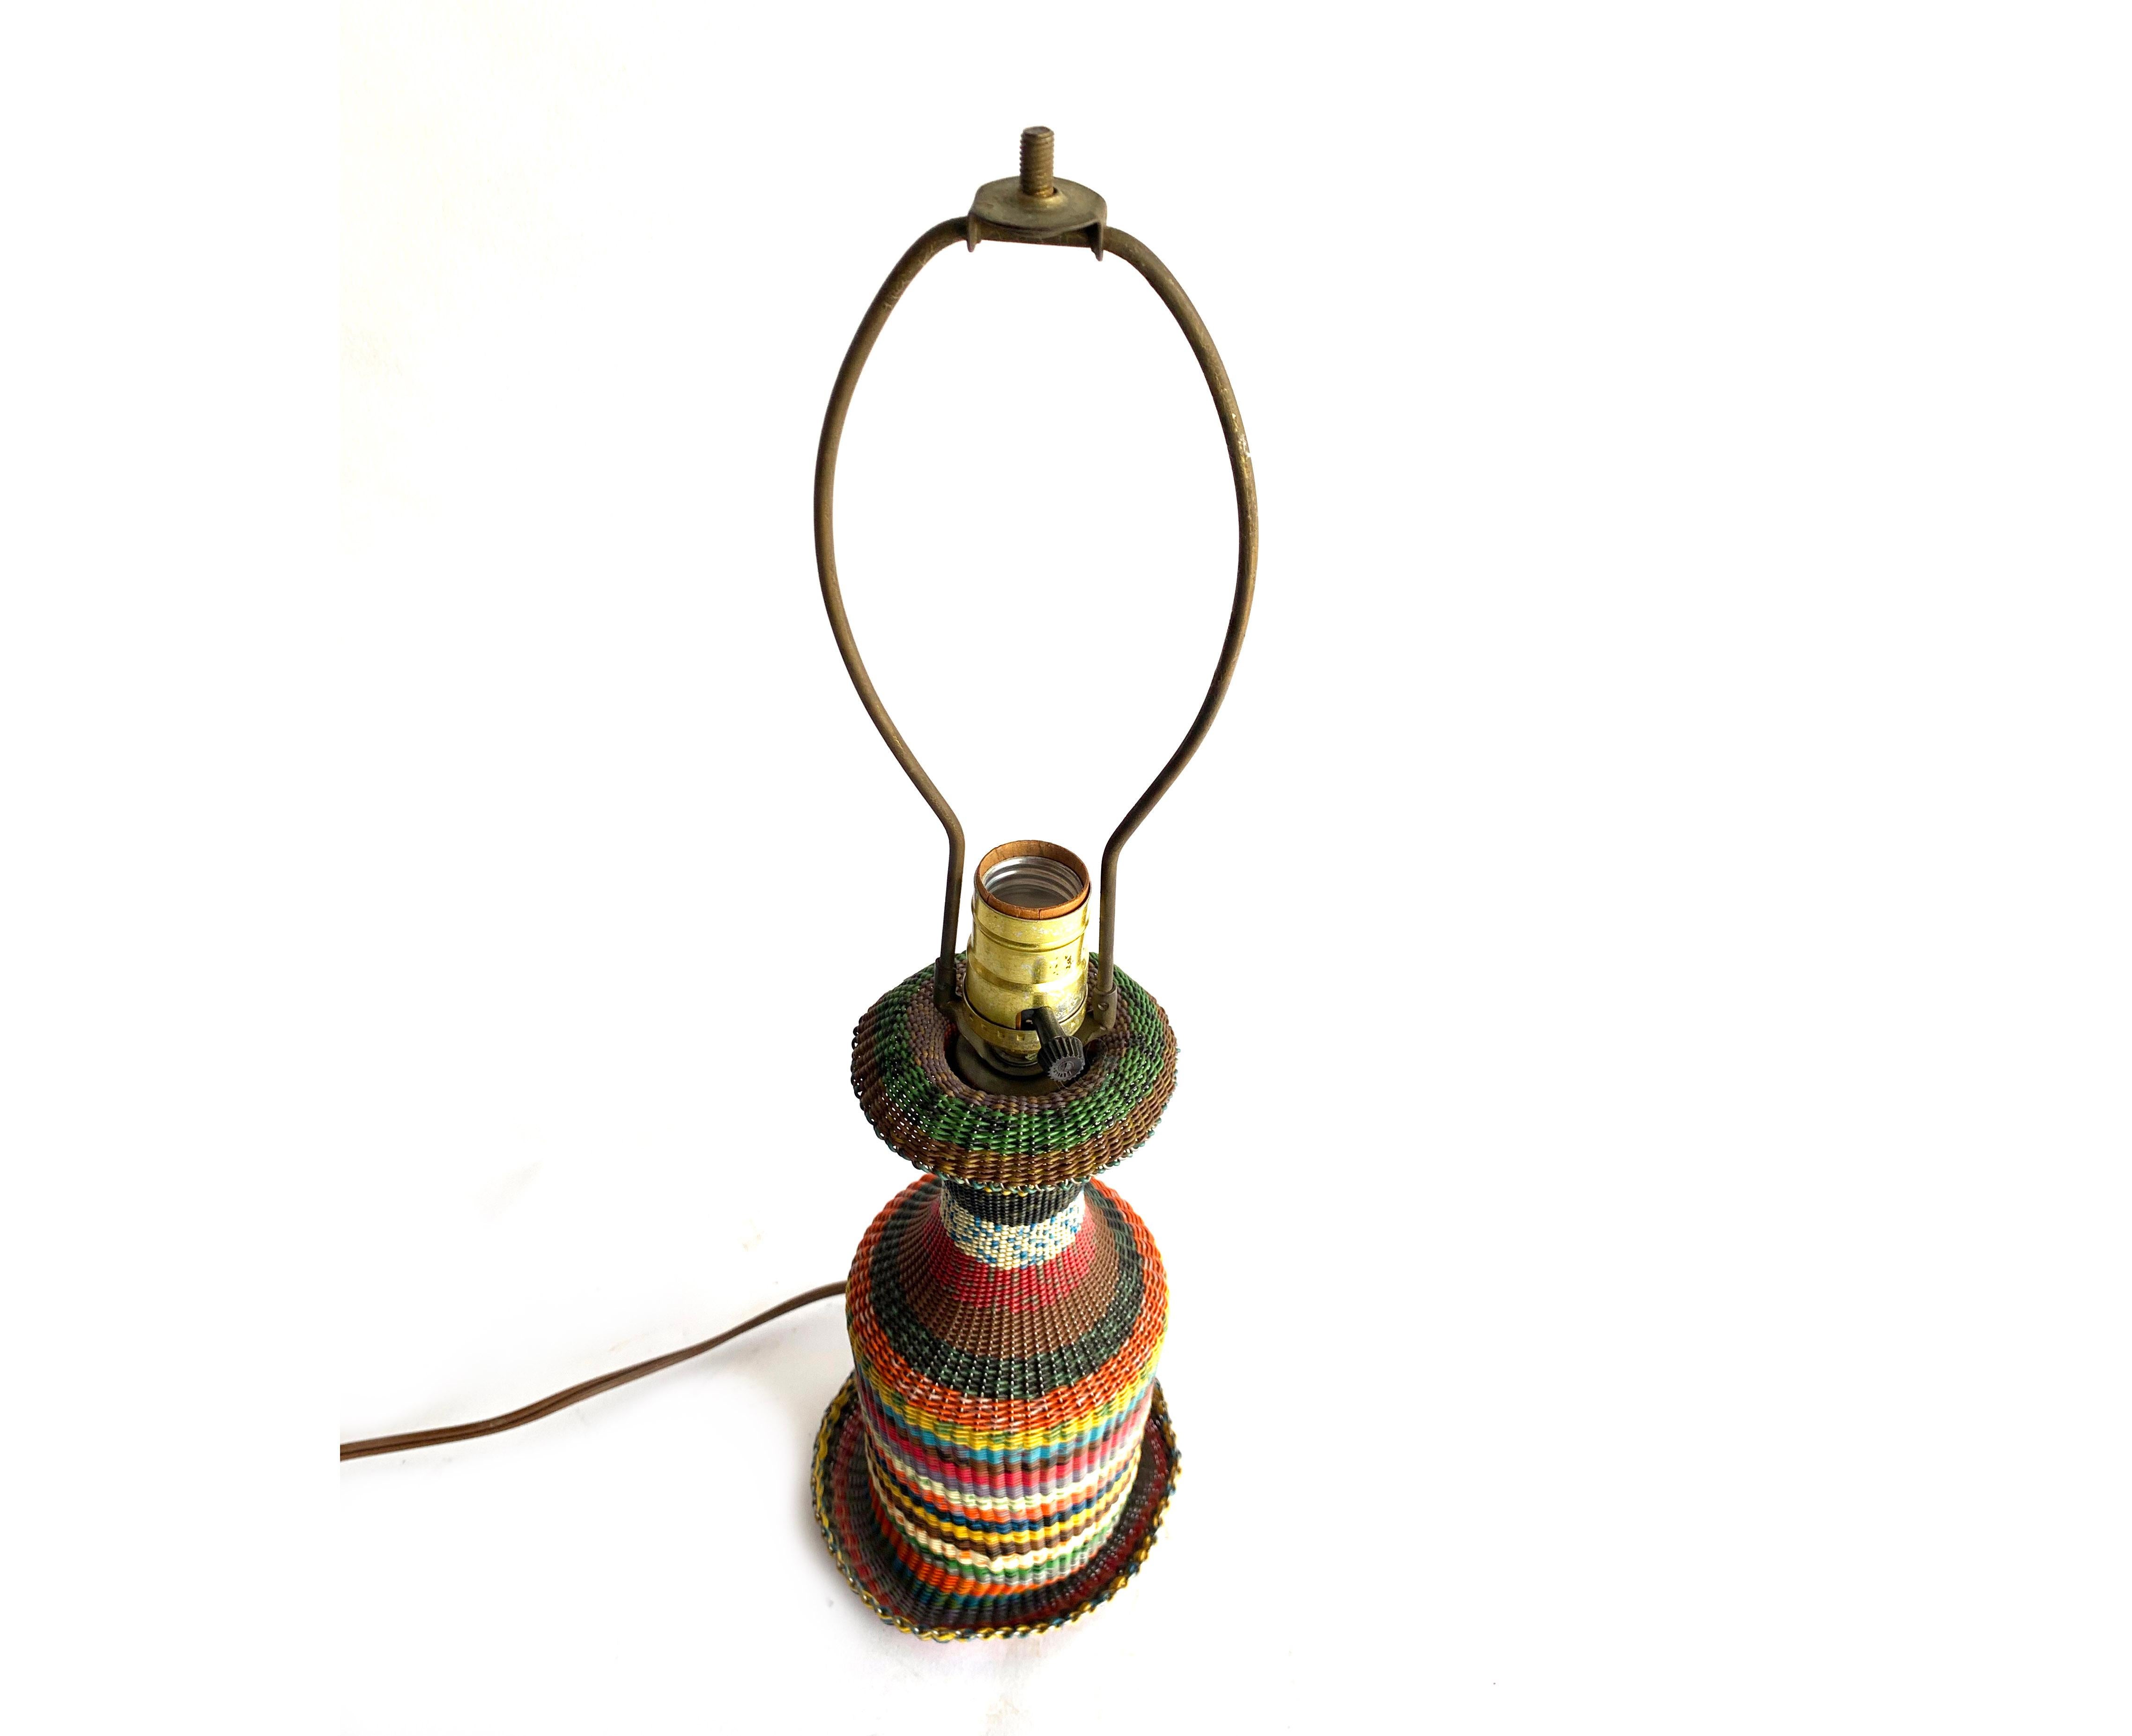 Vintage Hungarian Woven Wire Glass Bottle Table Lamp, 1960s Folk Art Light In Good Condition For Sale In Chicago, IL